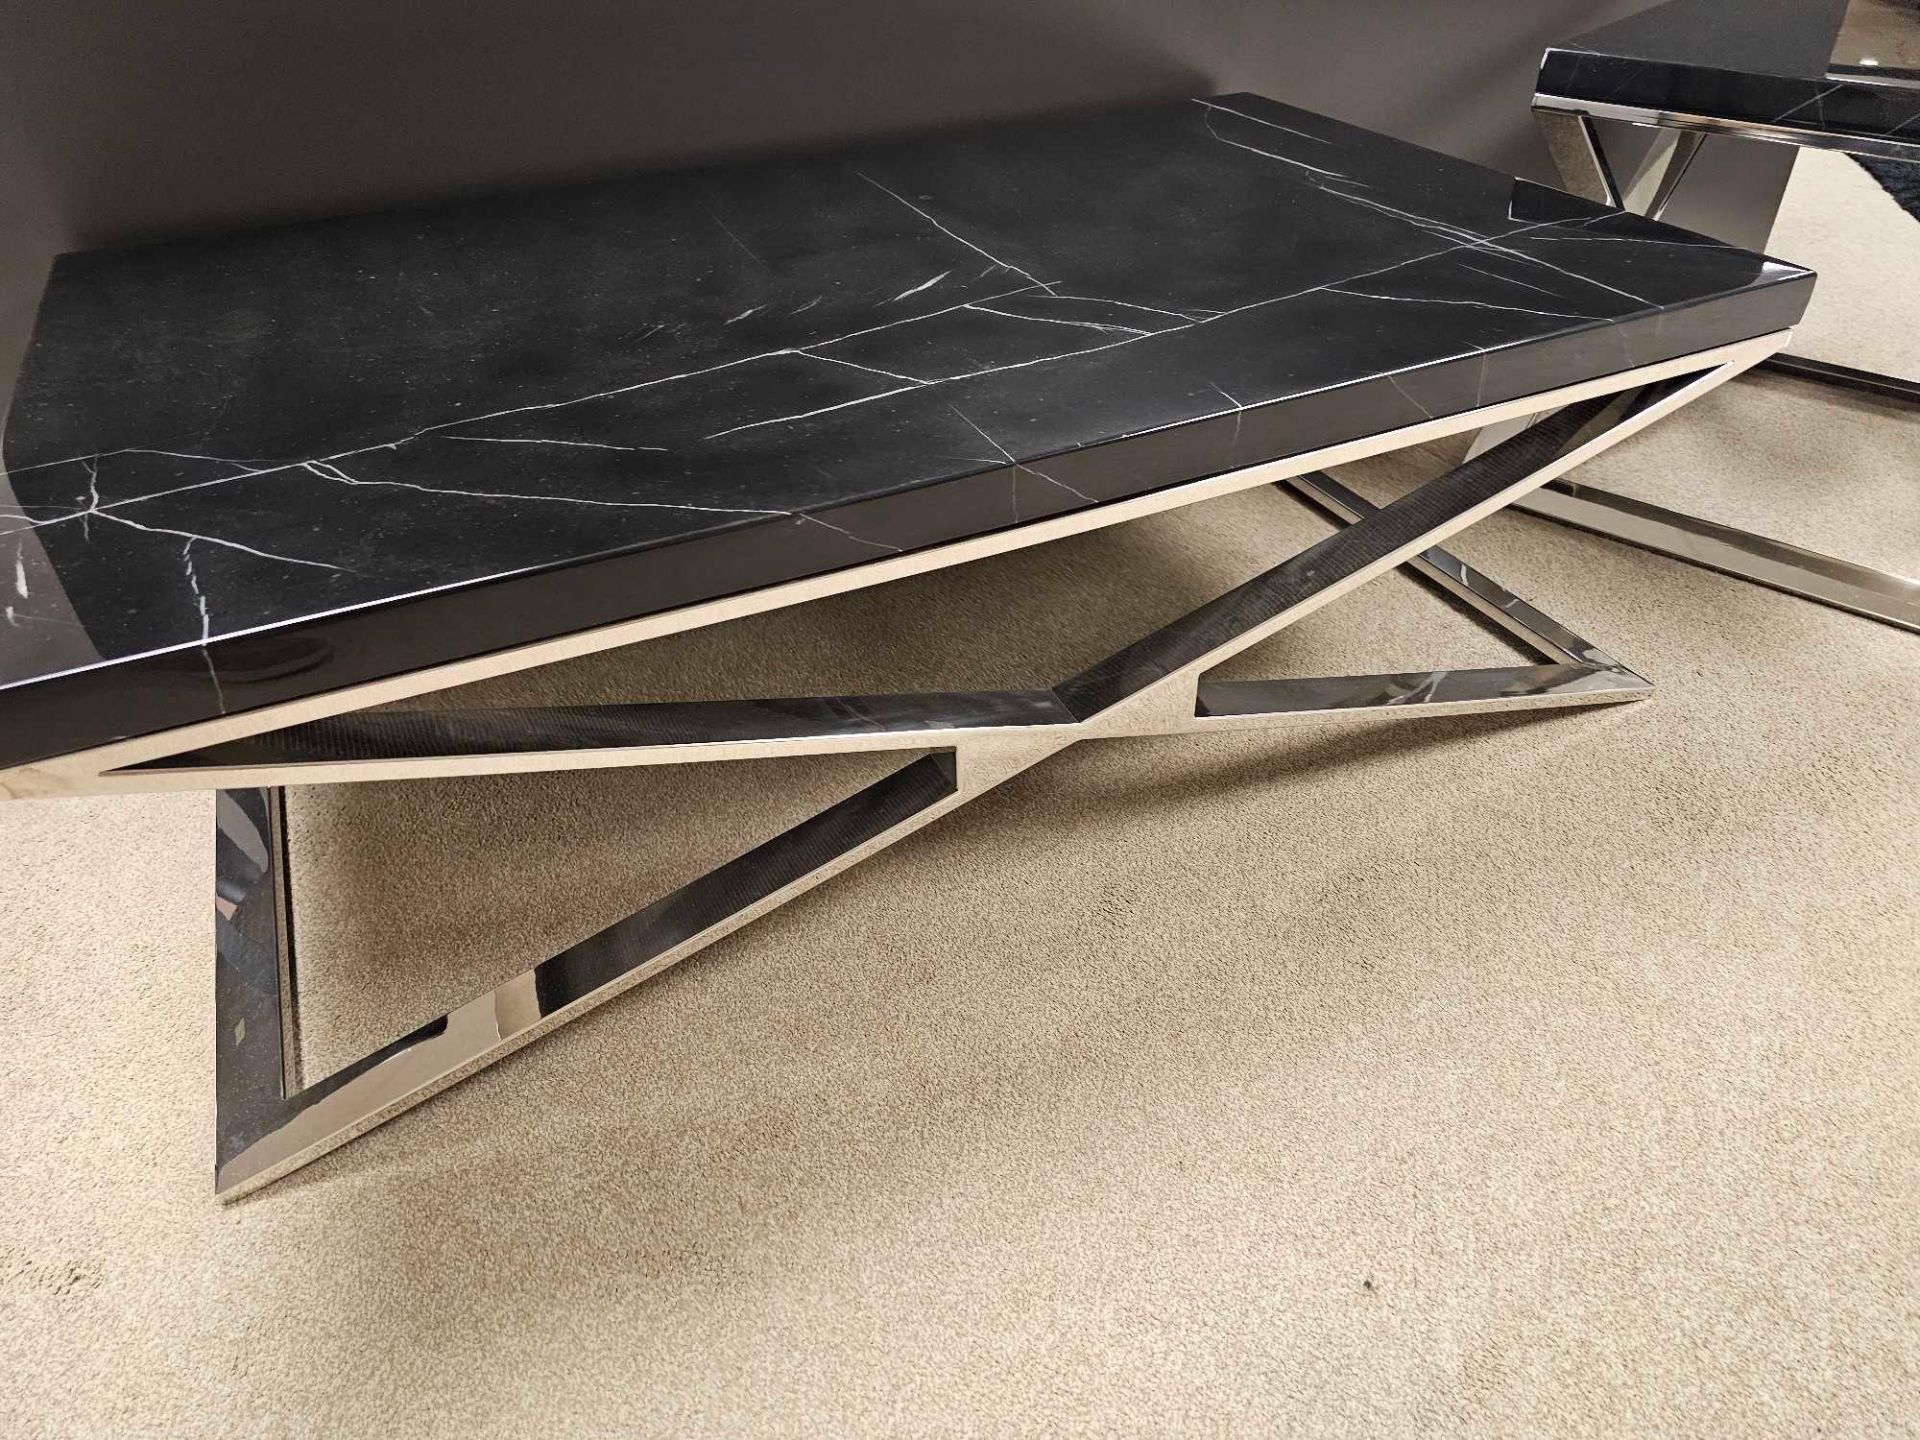 Zephyr Coffee Table by Kesterport This coffee Table has a classic frame design which we have updated - Image 6 of 7